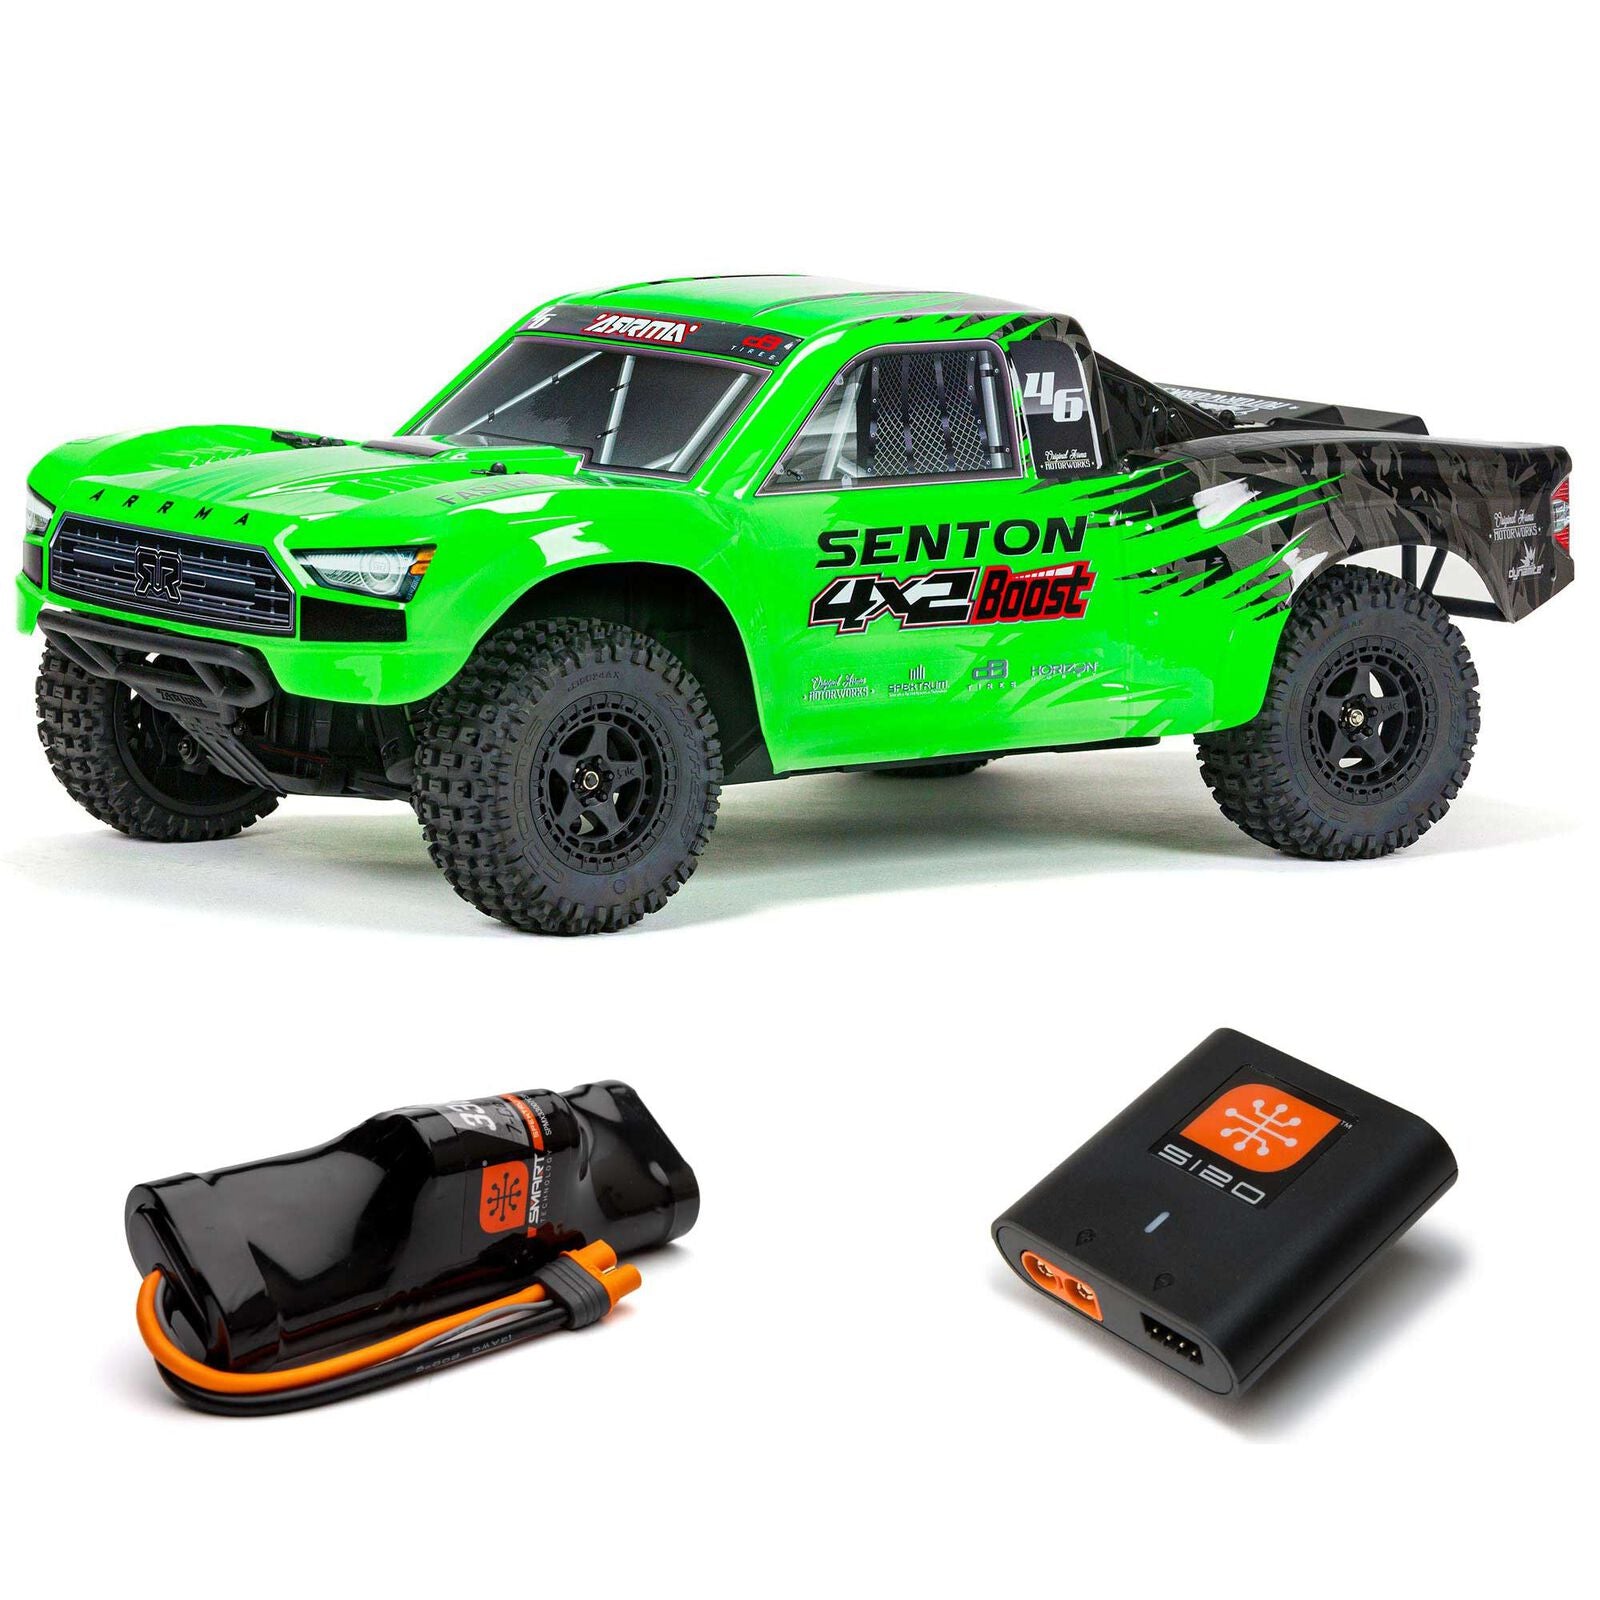 ARRMA ARA4103SV4 1/10 SENTON 4X2 BOOST MEGA 550 Brushed Short Course Truck RTR with Battery & Charger